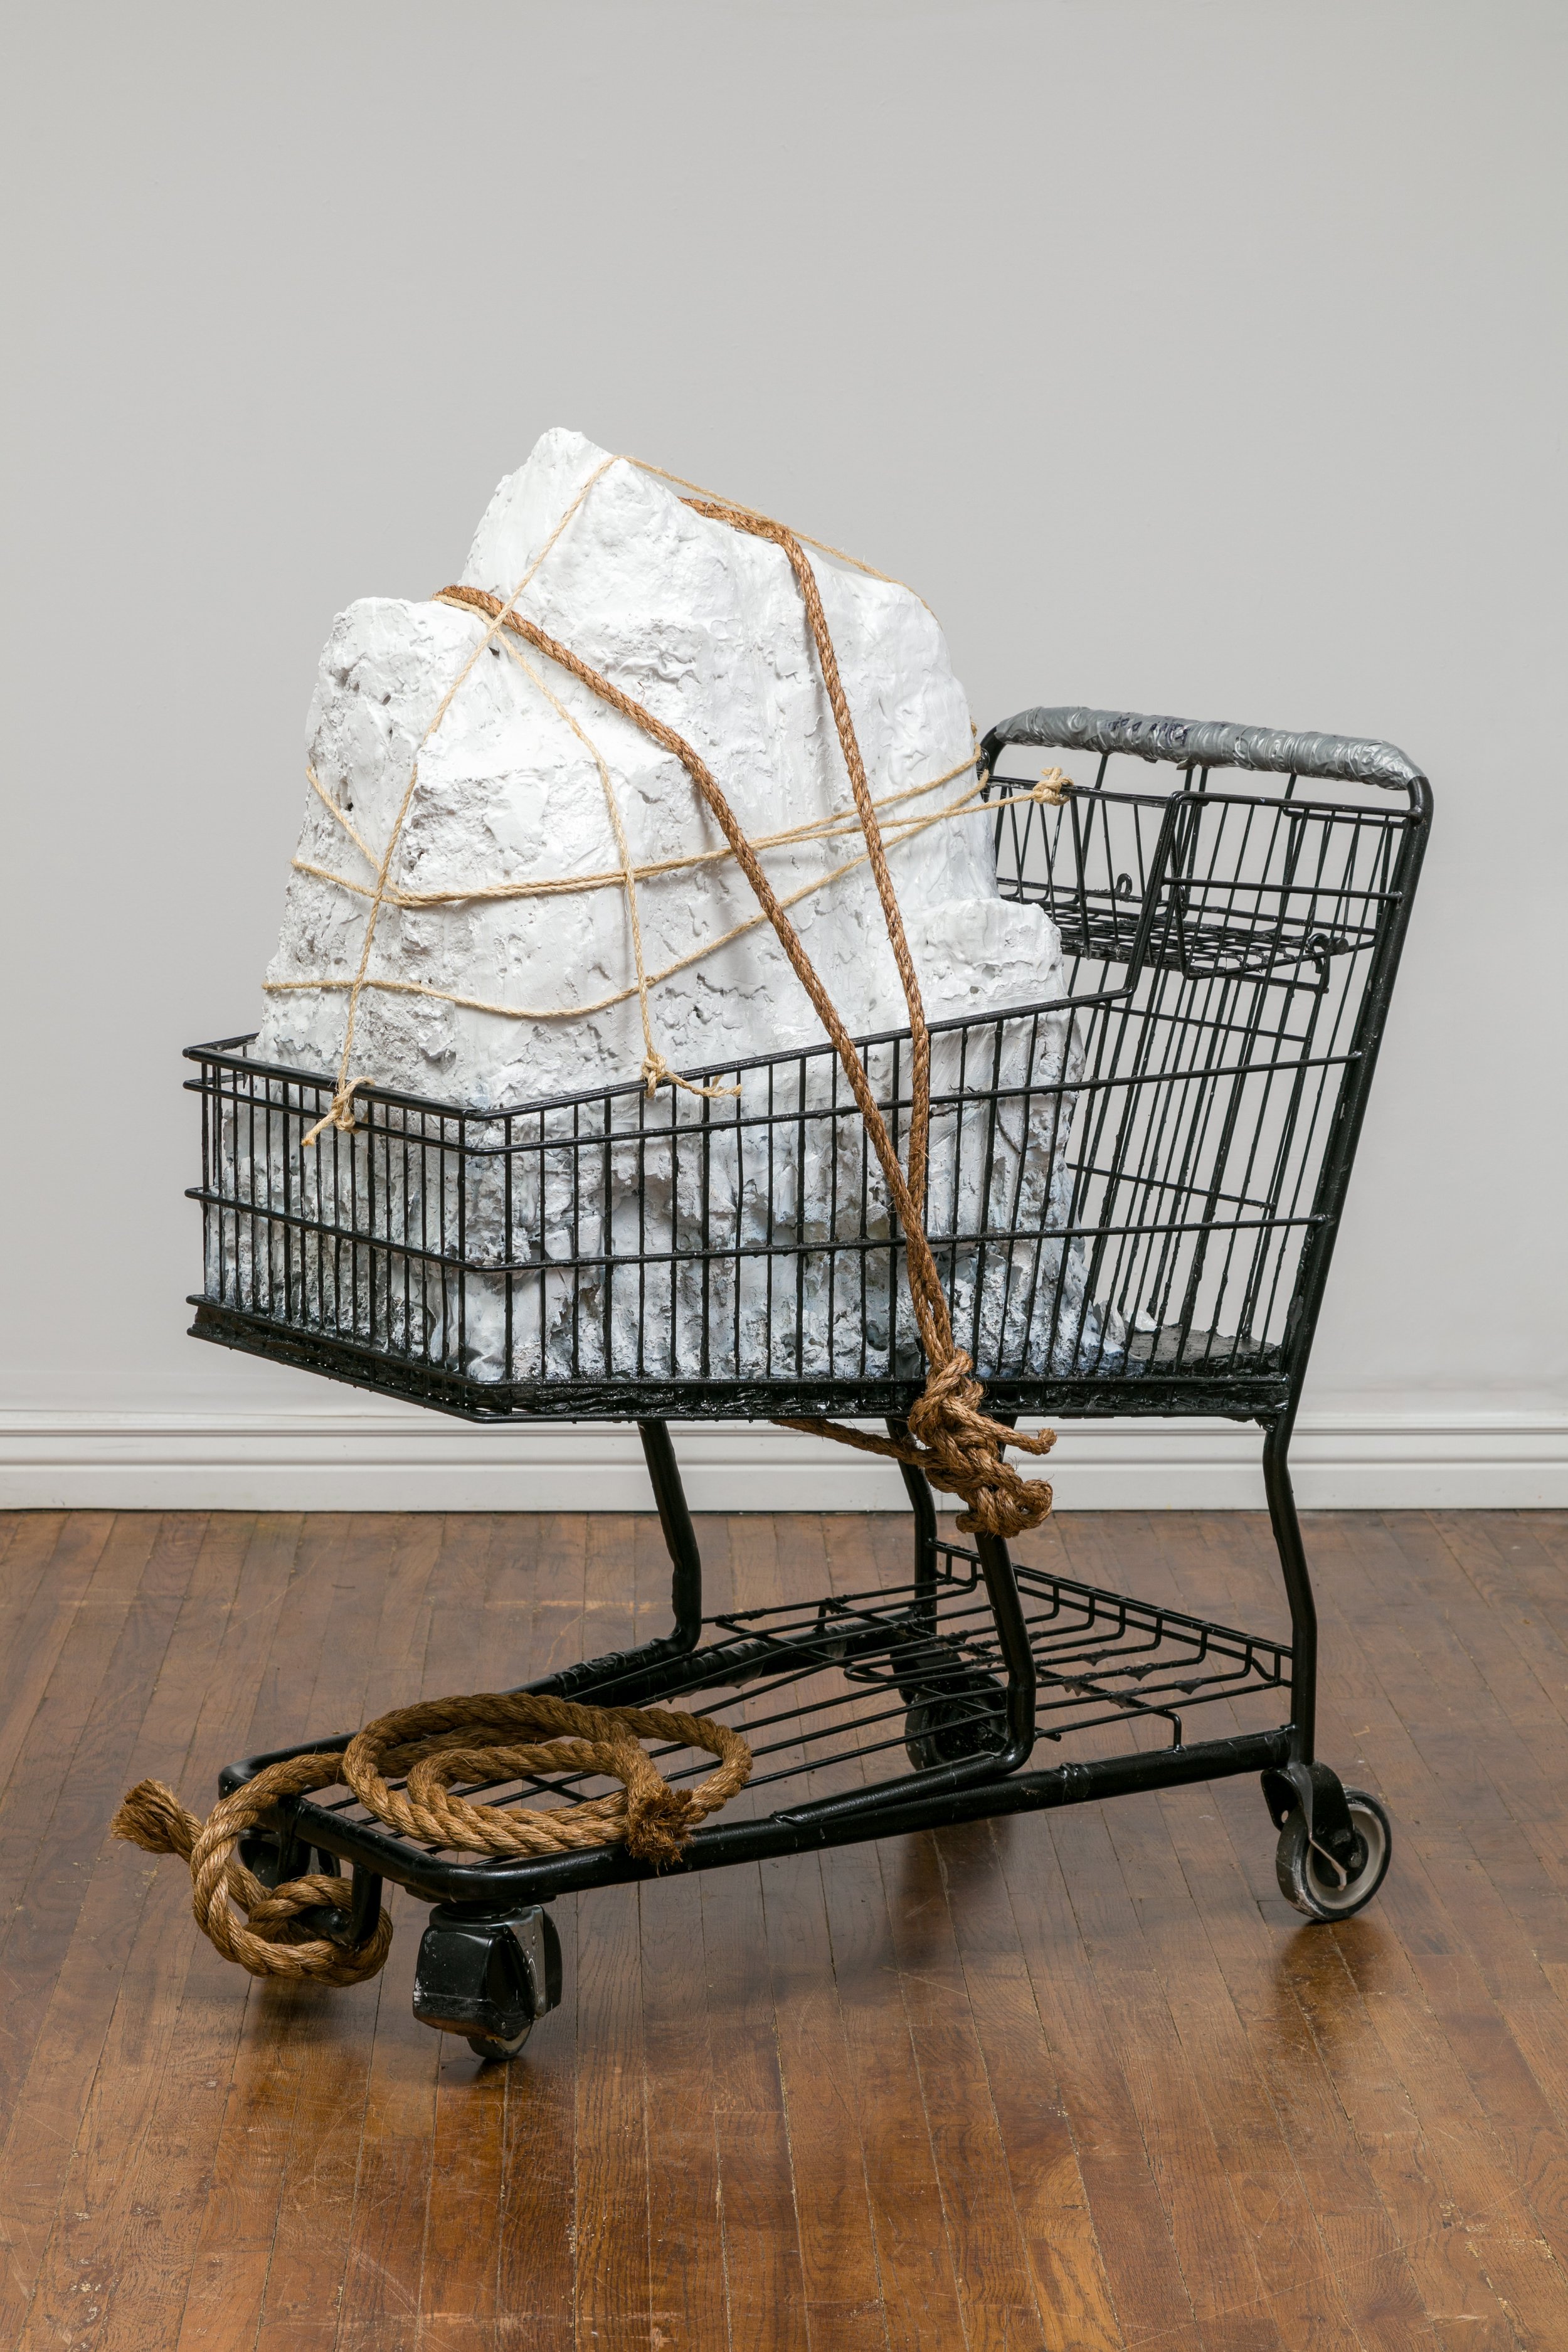 The Adrift," 54"x25"x40", metal shopping cart, plaster, paint, rope, crystals